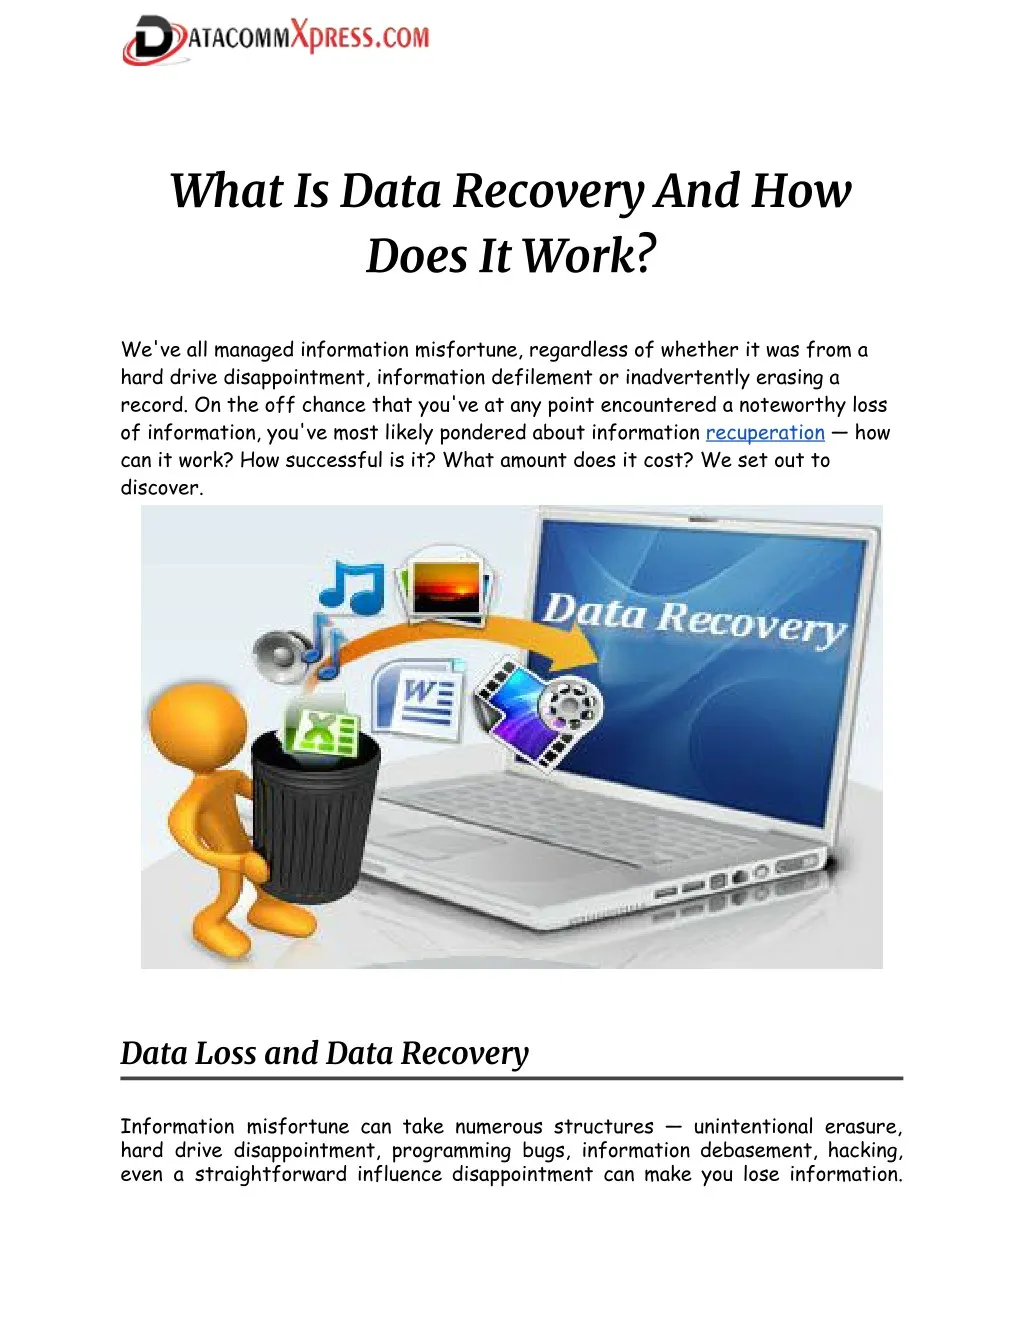 what is data recovery and how does it work